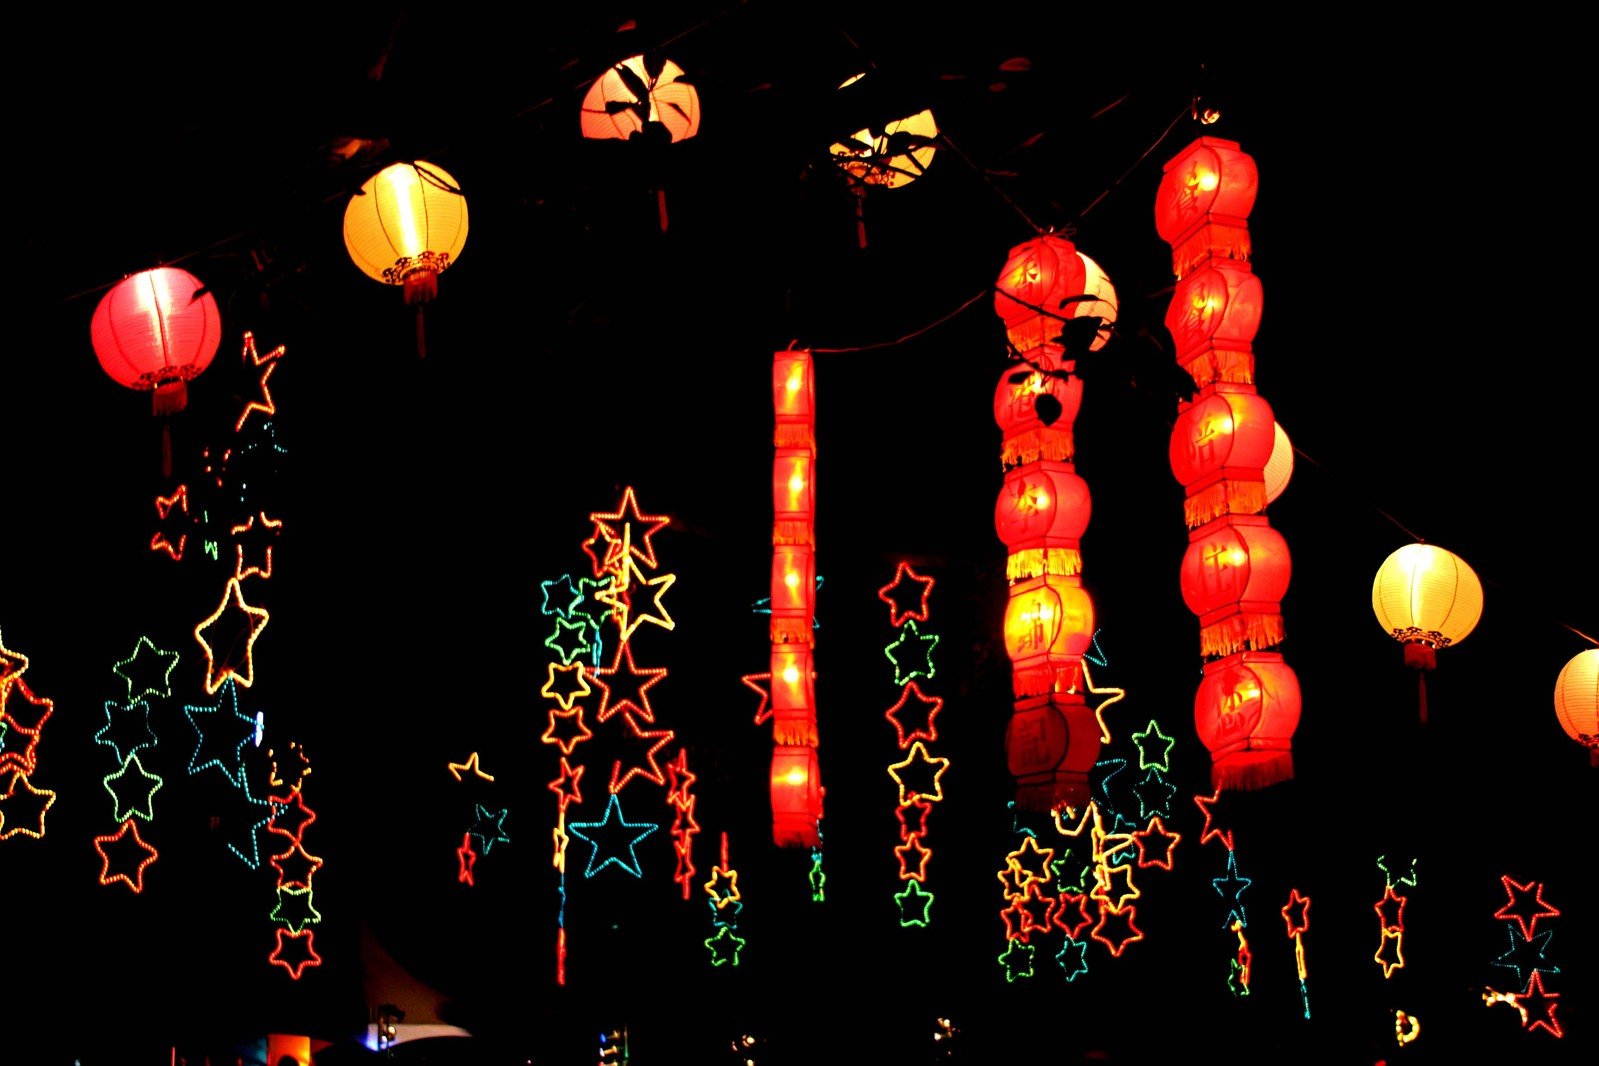 a wall of lights and paper lanterns that are red, yellow, green and white